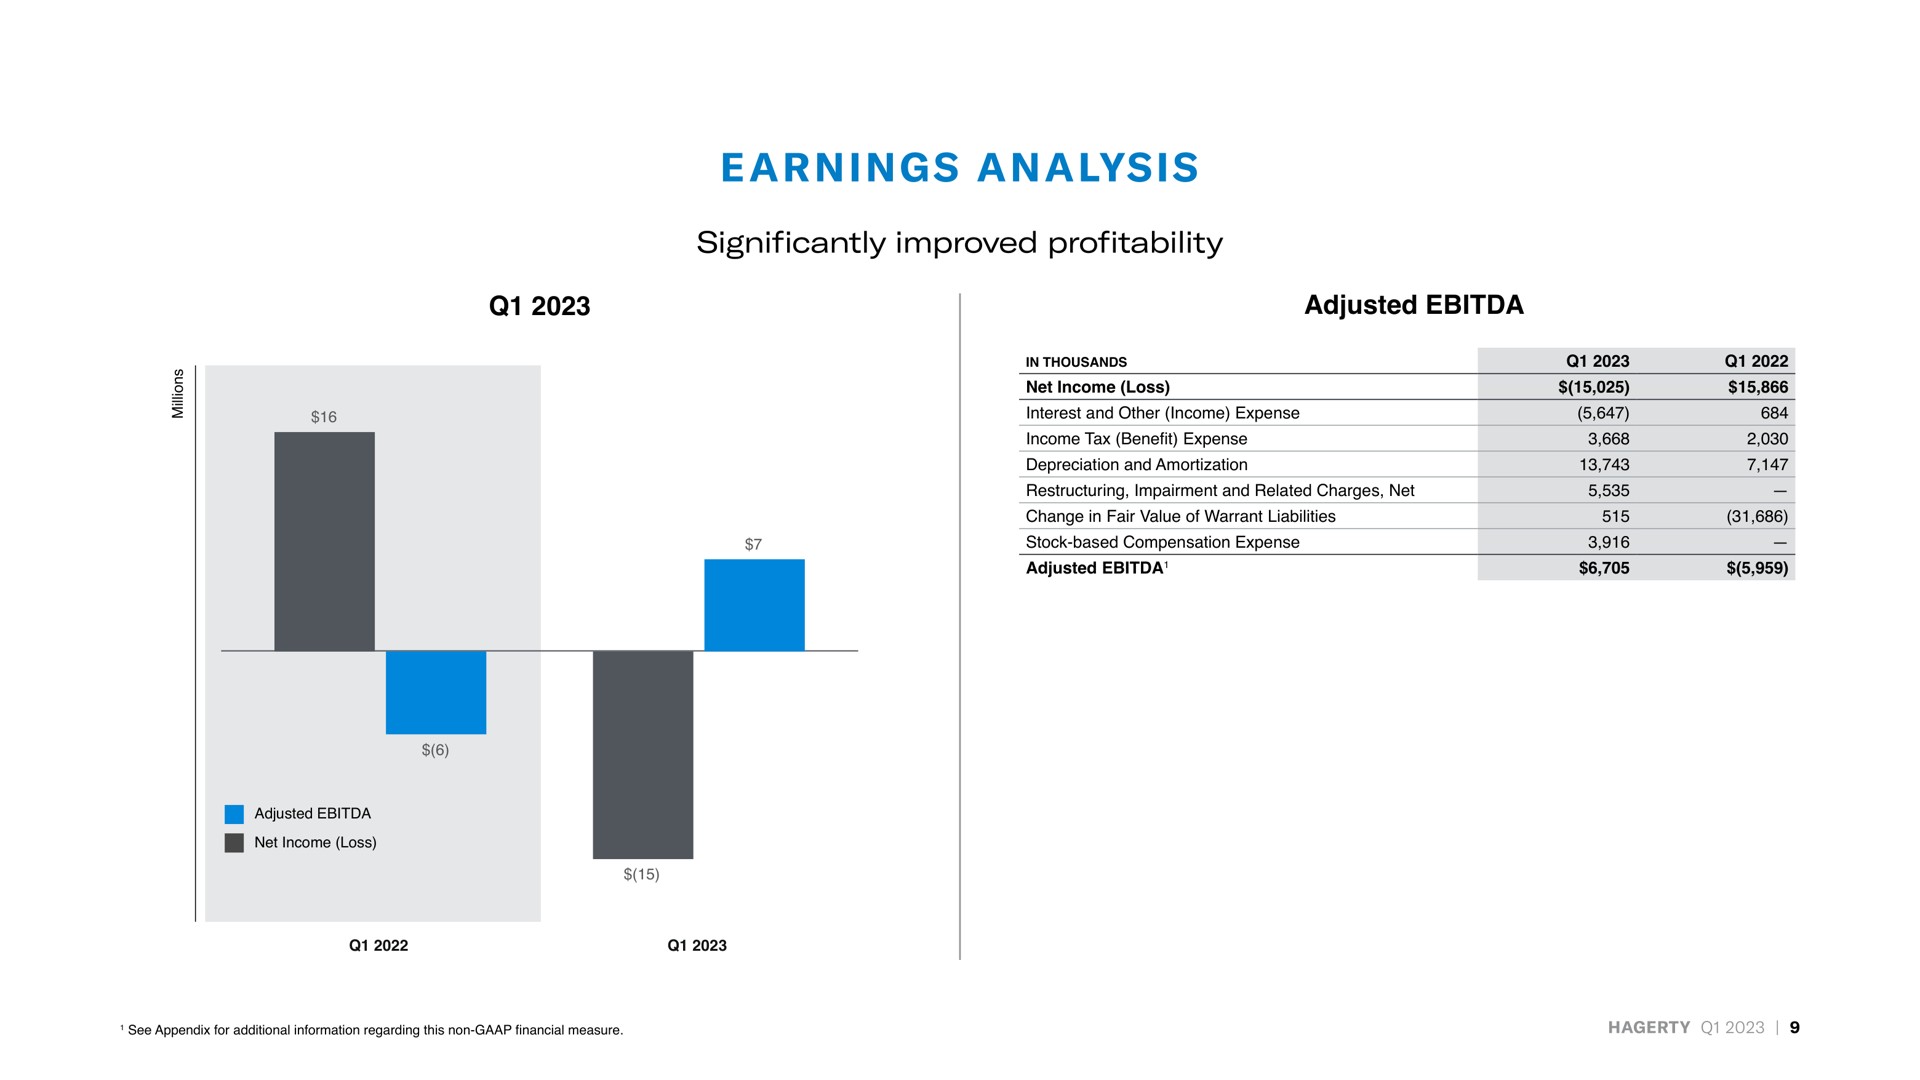 adjusted earnings analysis significantly improved profitability net income loss | Hagerty